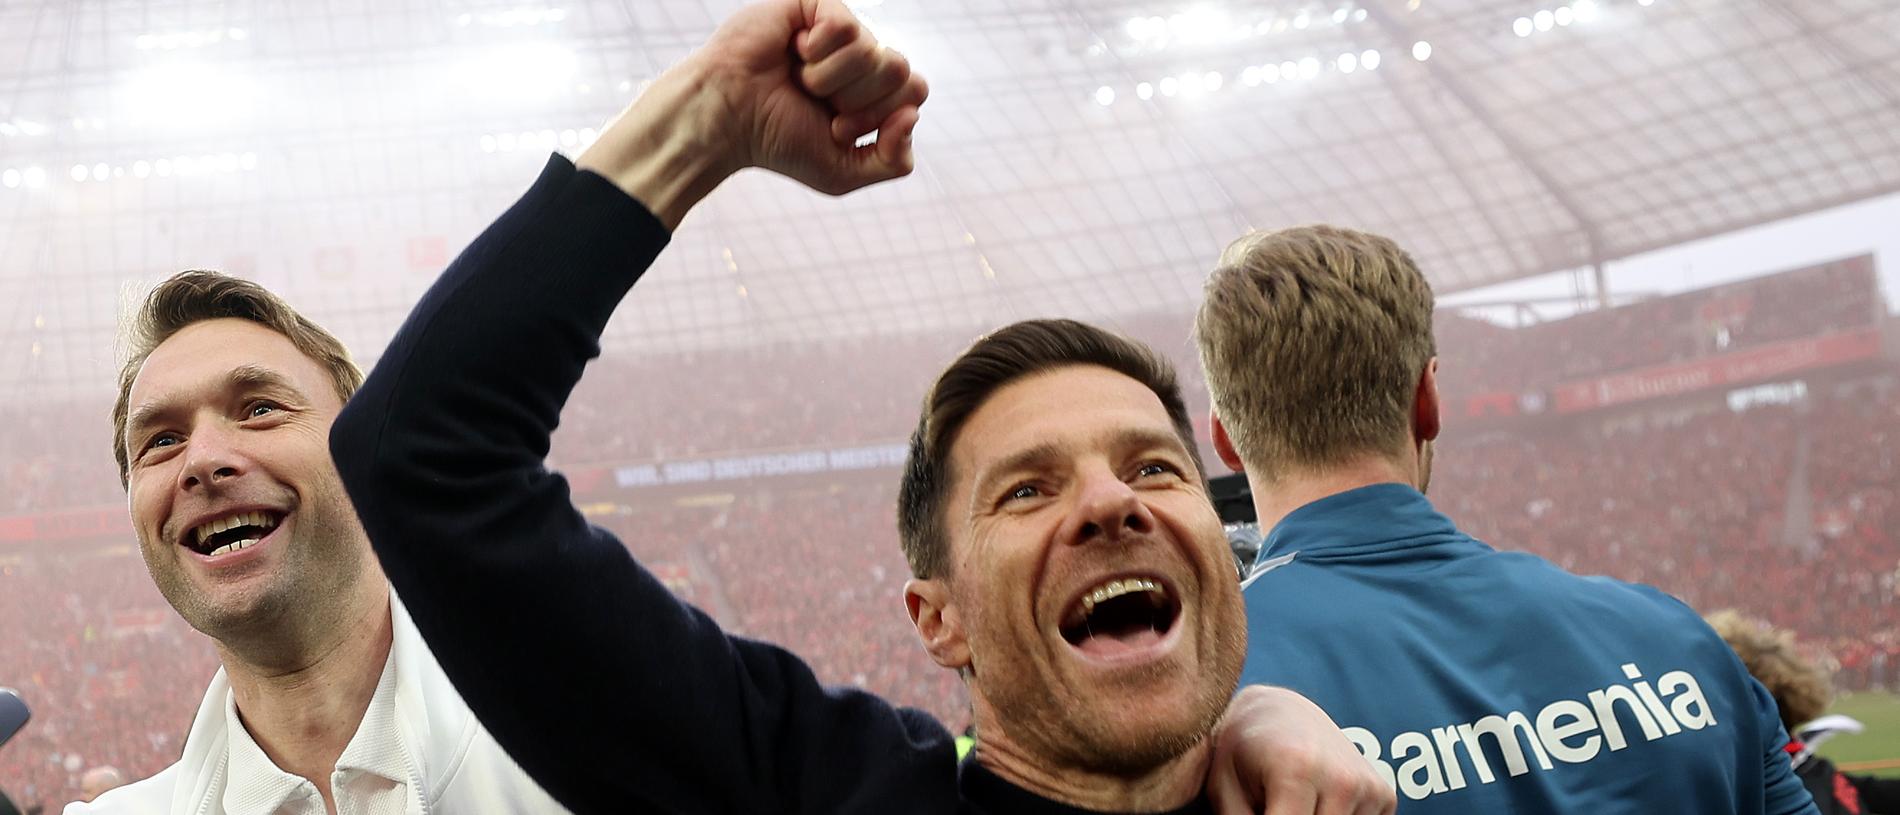 Xabi Alonso celebrates after guiding Bayer Leverkusen to its first Bundesliga title. (Photo by Lars Baron/Getty Images)